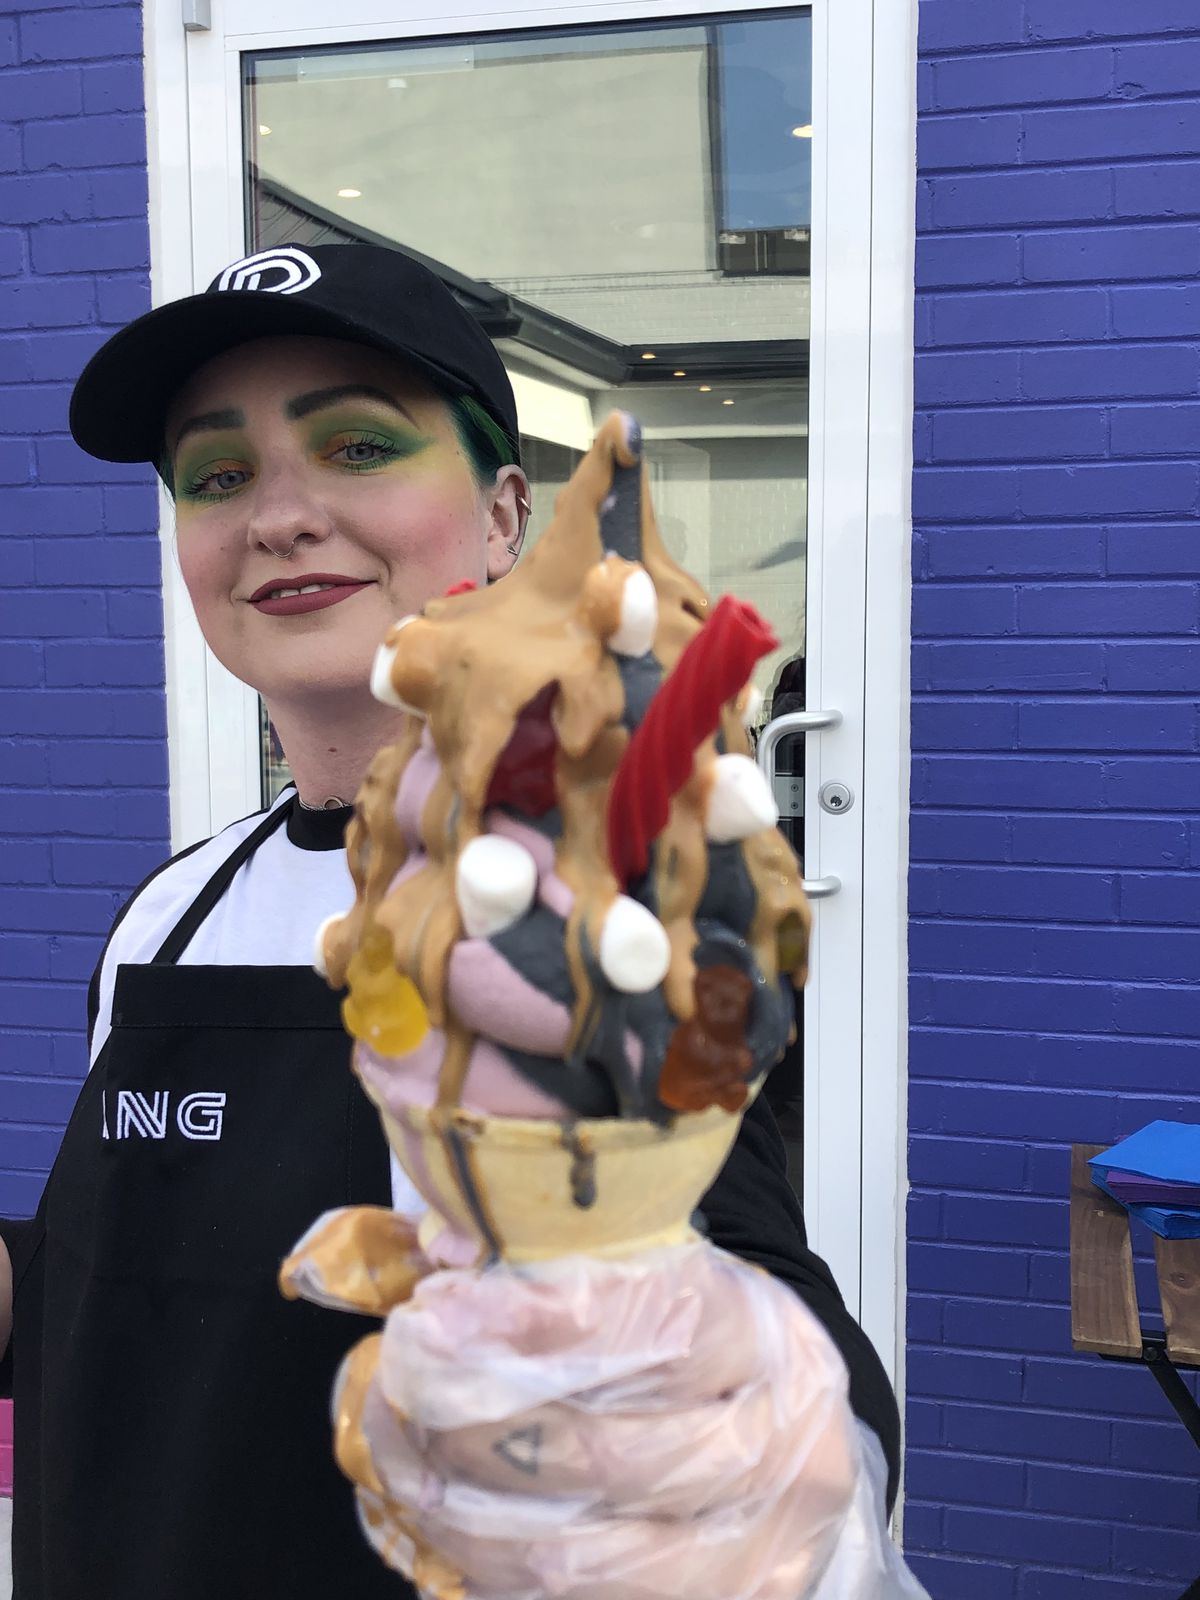 A photo of a manager at Dang holding up a cone of swirled purple and gray soft serve adorned with cookie butter sauce, marshmallows and licorice 